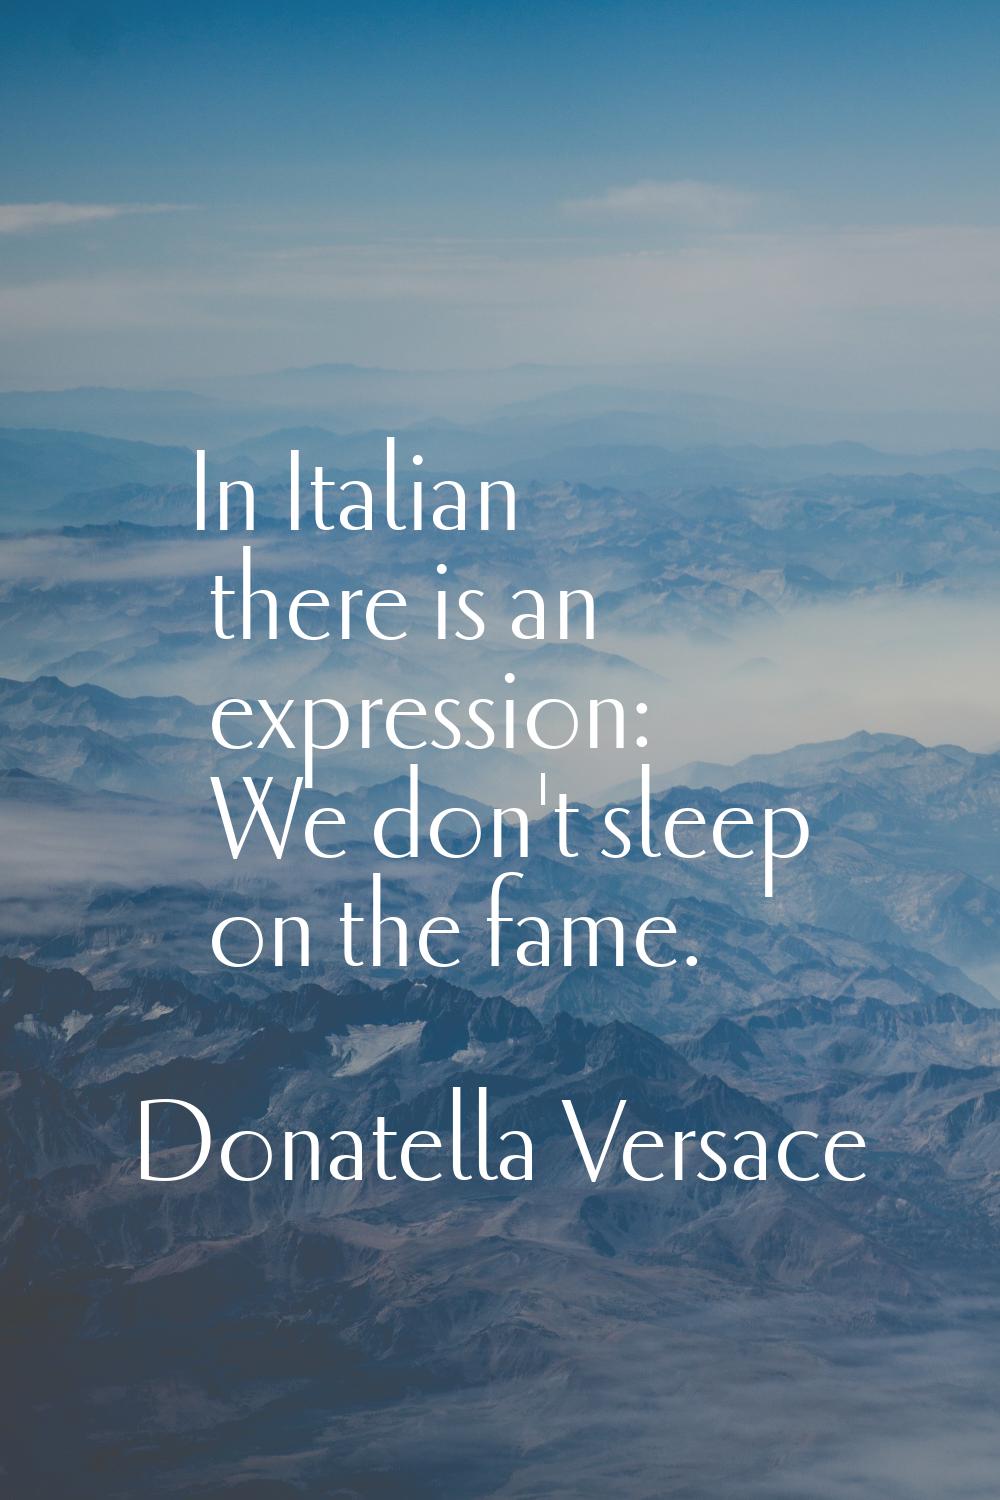 In Italian there is an expression: We don't sleep on the fame.